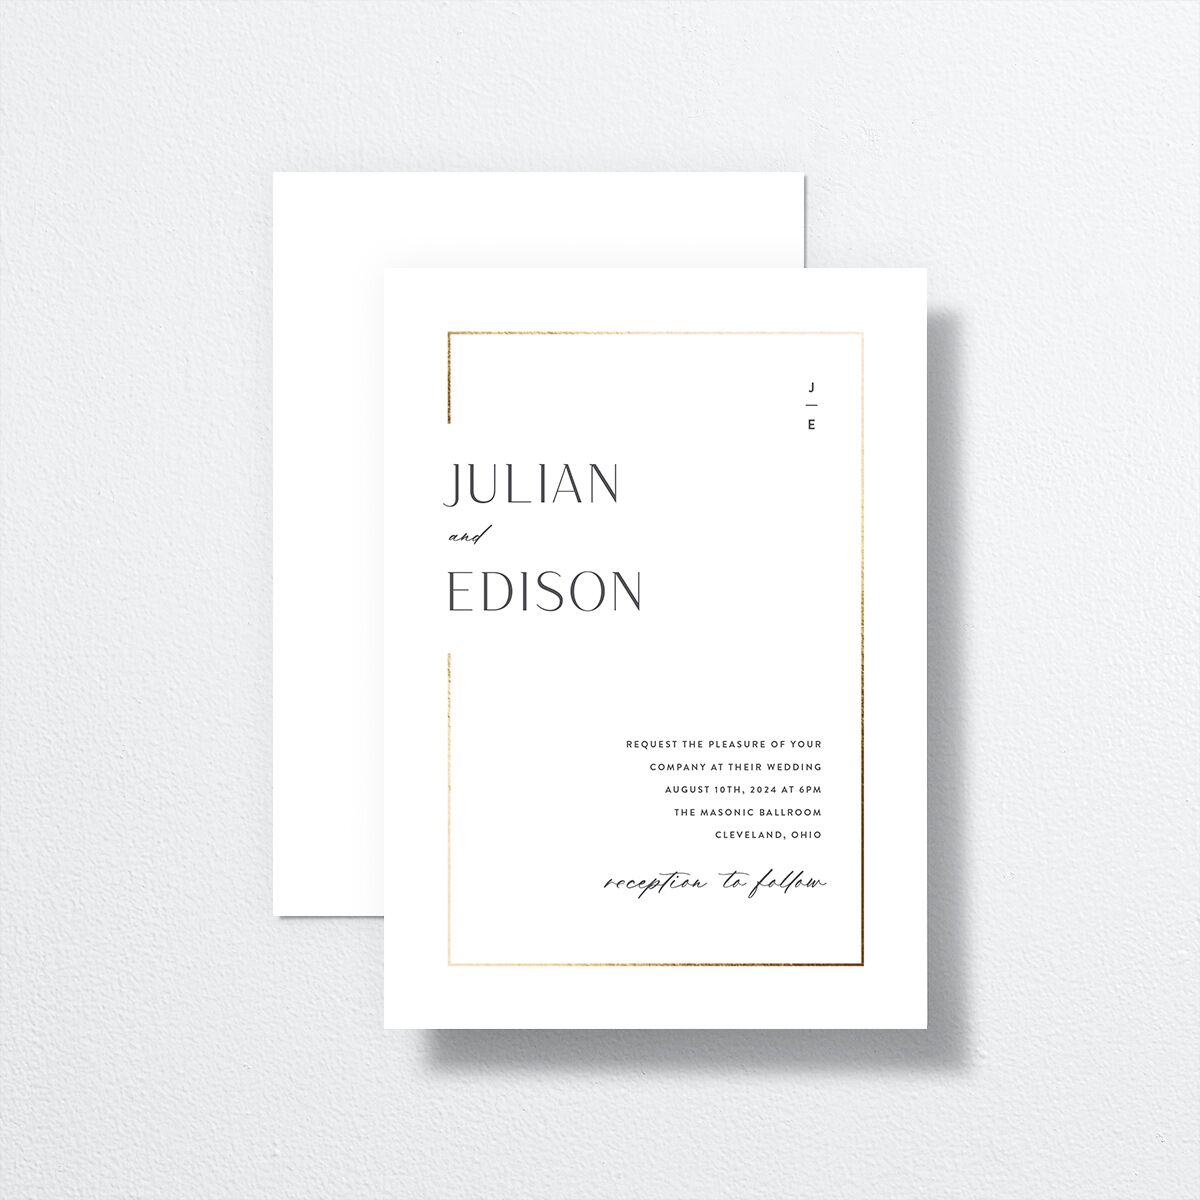 Modern Minimalist Wedding Invitations by Vera Wang front-and-back in White